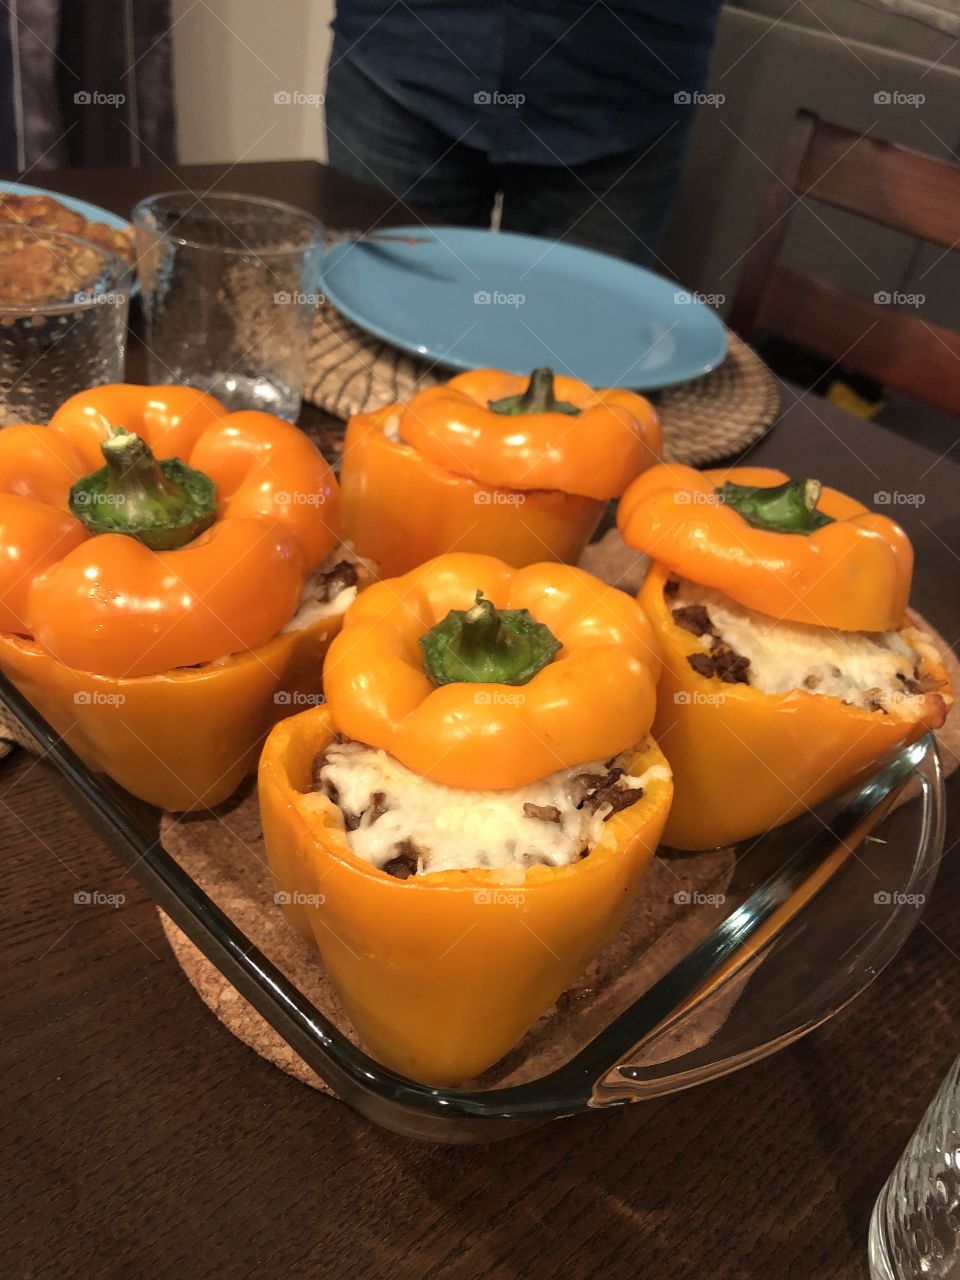 Juicy and crunchy stuffed yellow peppers... Perfect healthy meal and easy to do, gourmet!